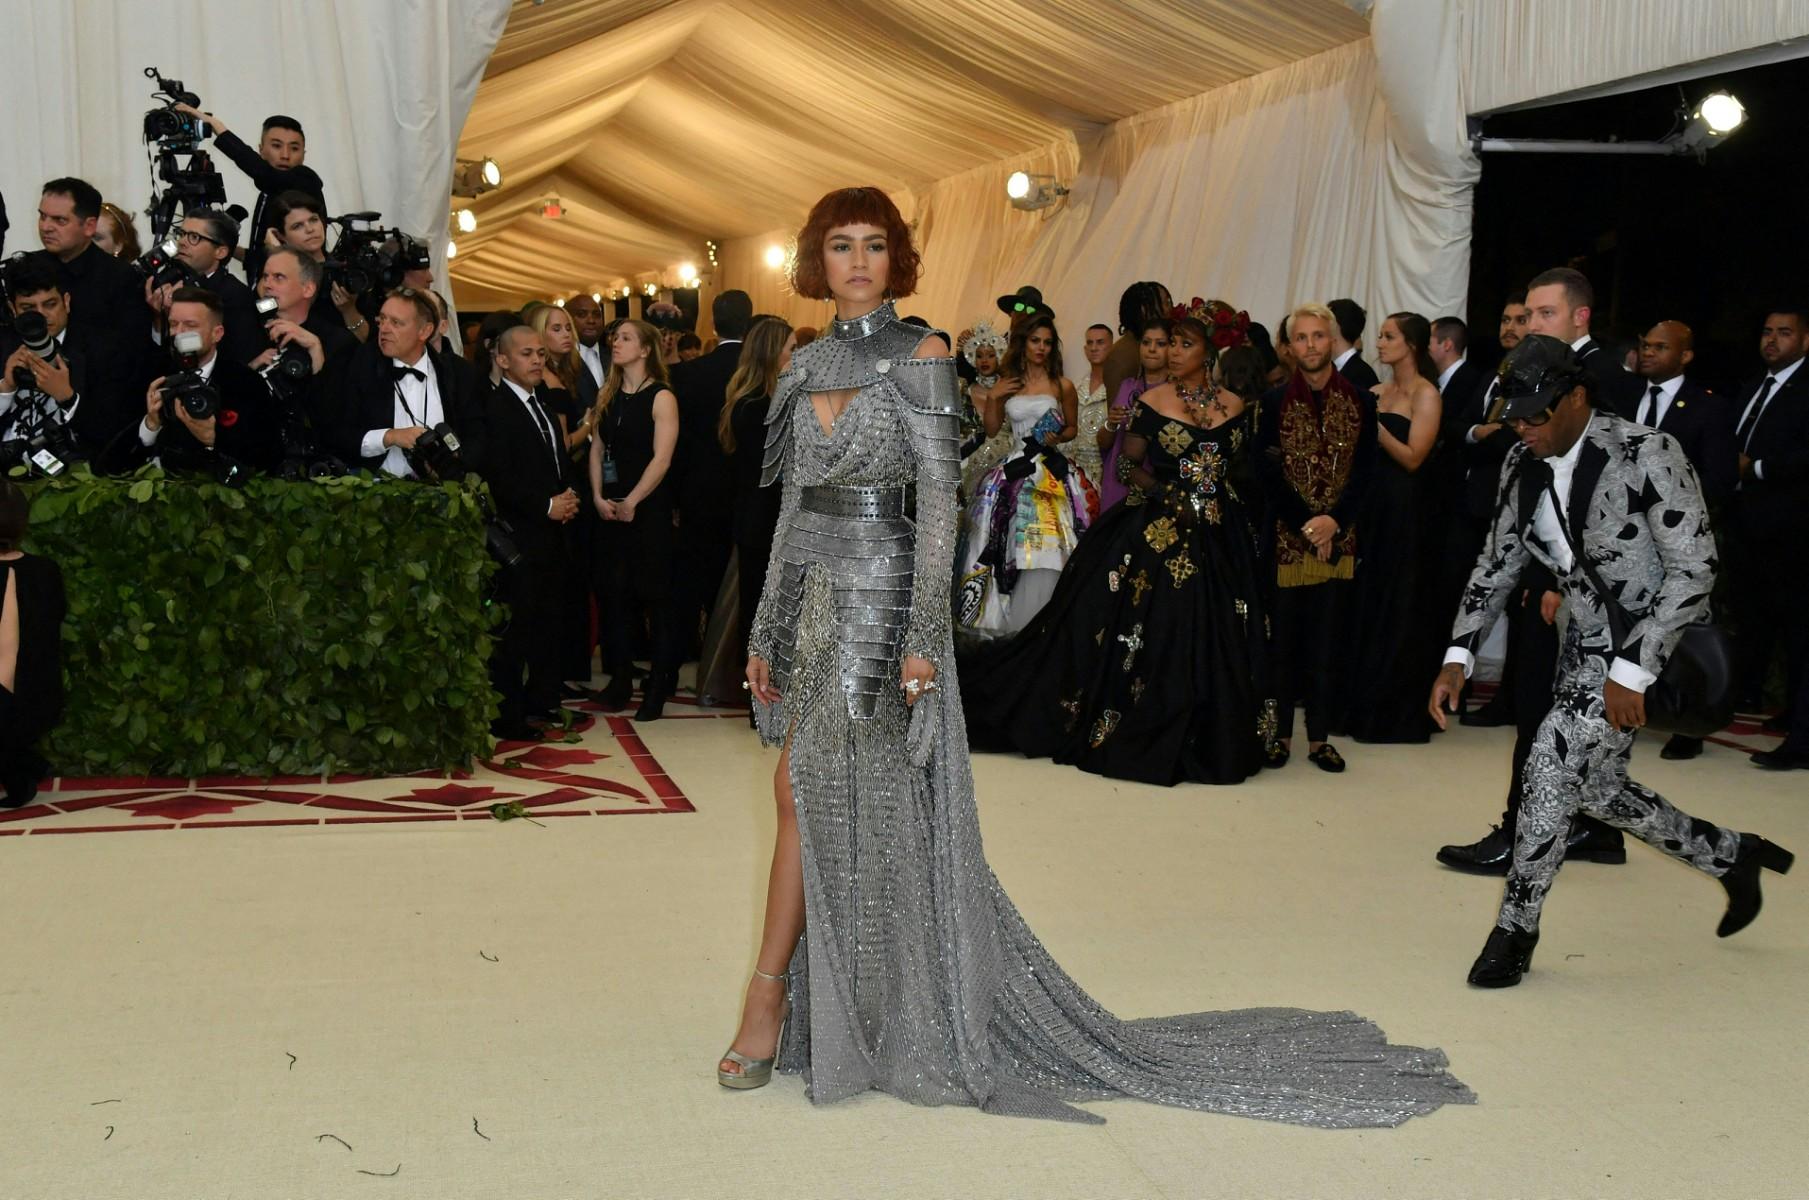 Zendaya always knows how to make a grand entrance at the Met Gala. In 2018, she stunned everyone with a custom Versace gown inspired by Joan of Arc, perfectly matching the theme of 